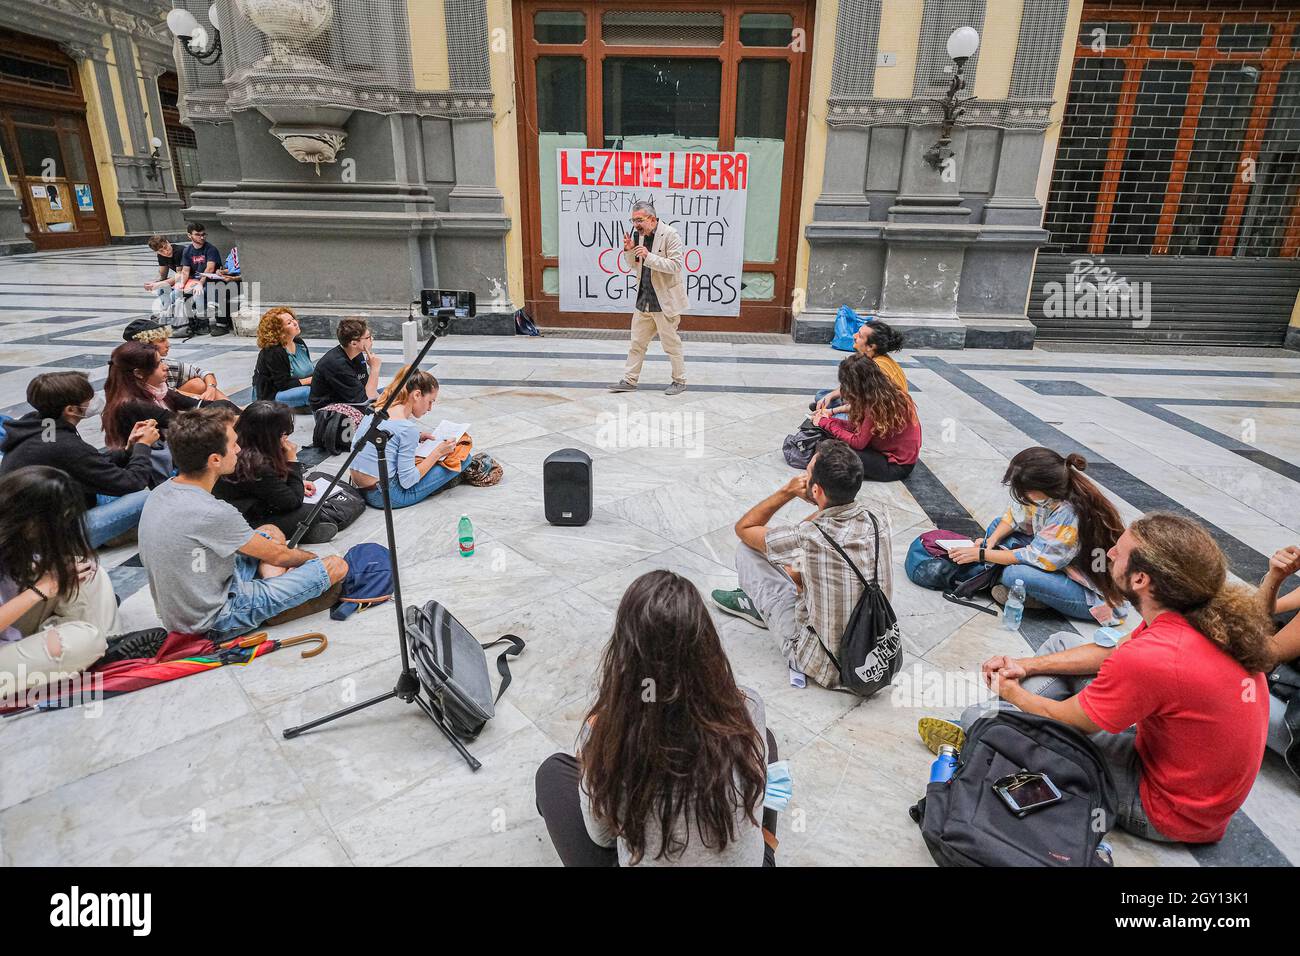 Professors and students at the University of Naples l'orientale are protesting against the government's green pass requirement to attend lectures in order to combat the COVID-19 epidemic. Stock Photo